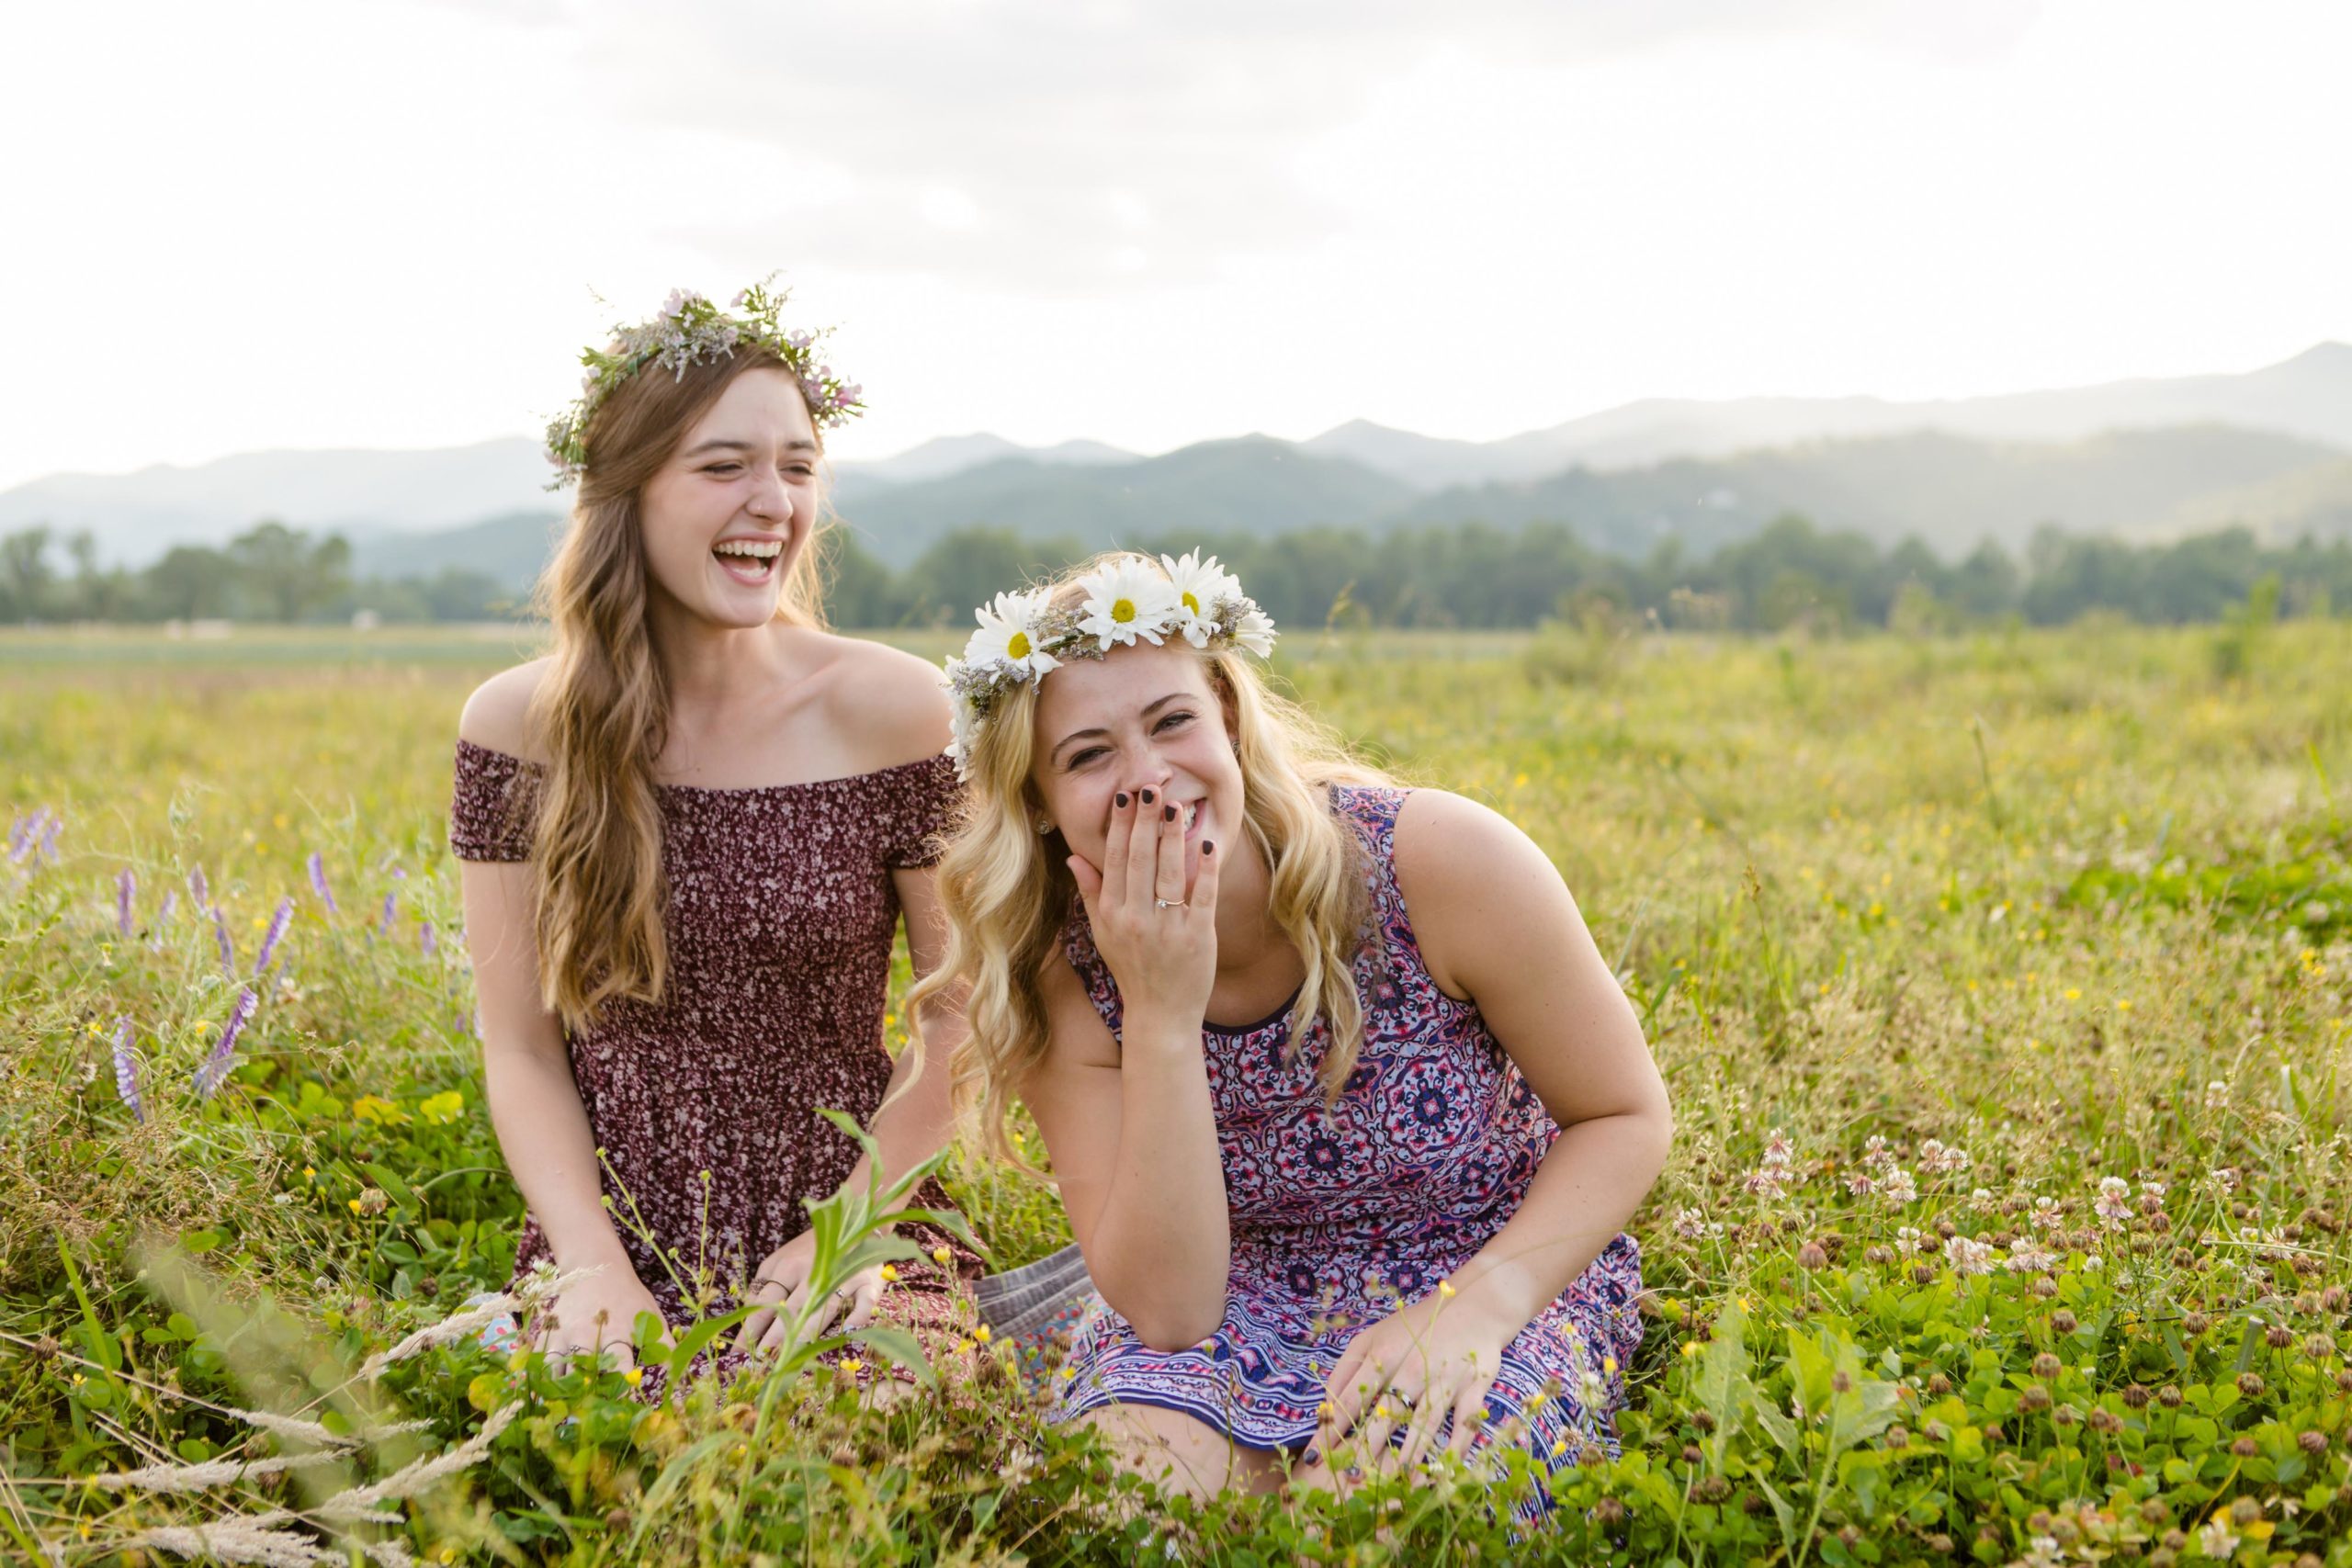 Best Friend Senior Session Kilby and Neva laughing sitting in a field of flowers Photo